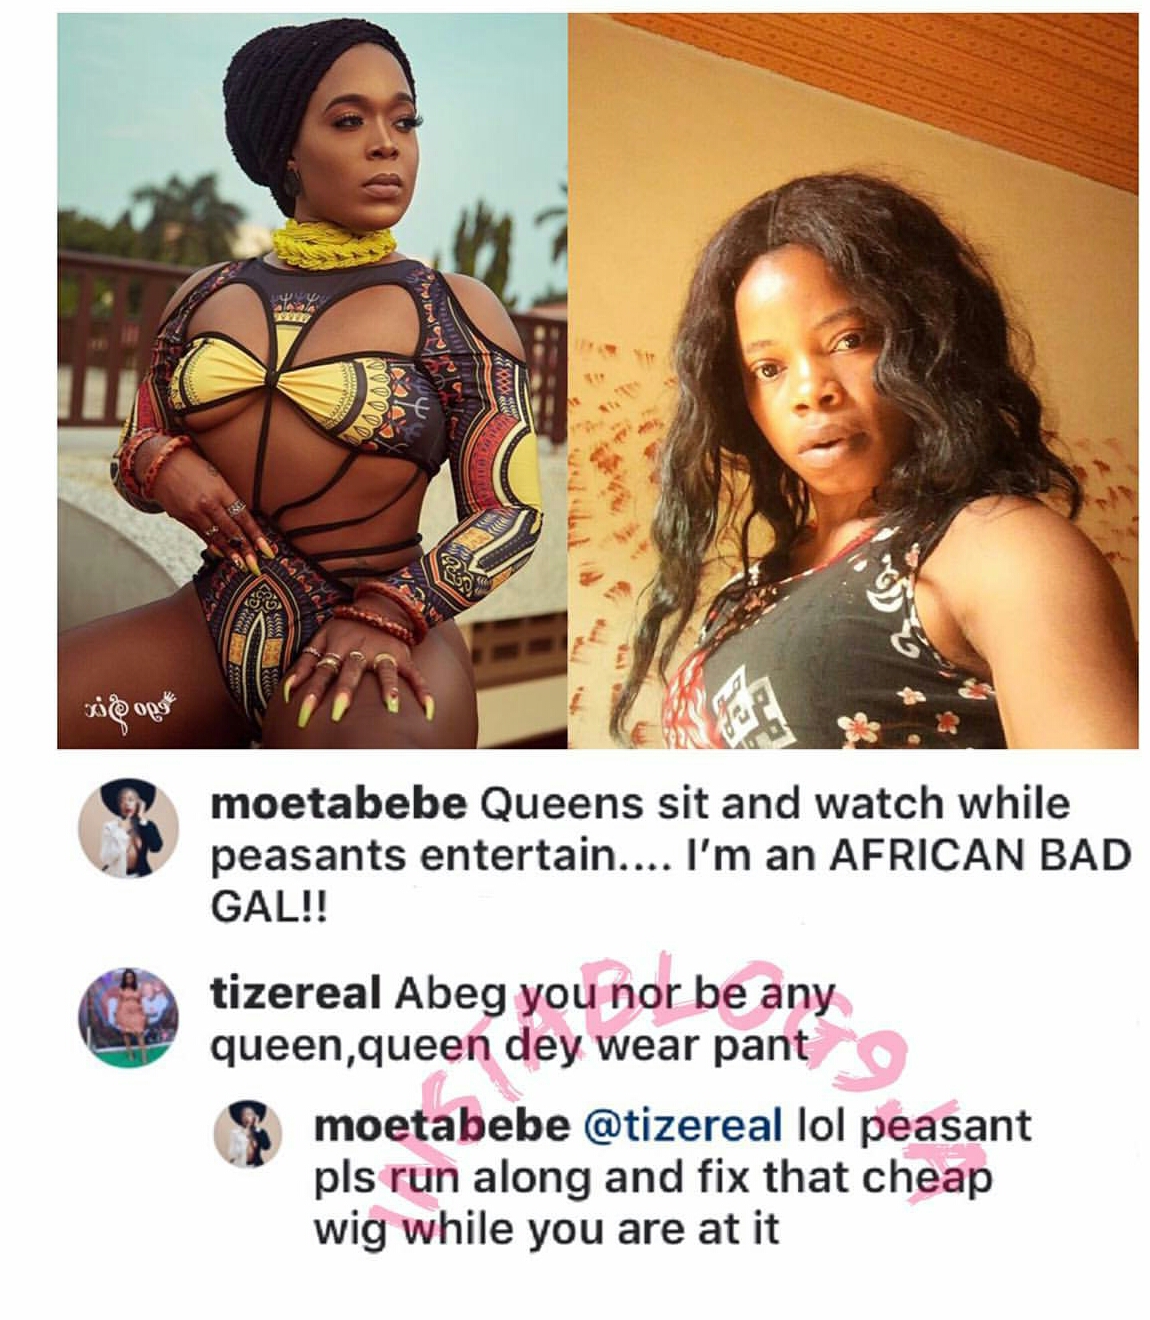 War of Words between OAP Moet Abebe and a follower over a wig gets social media buzzing